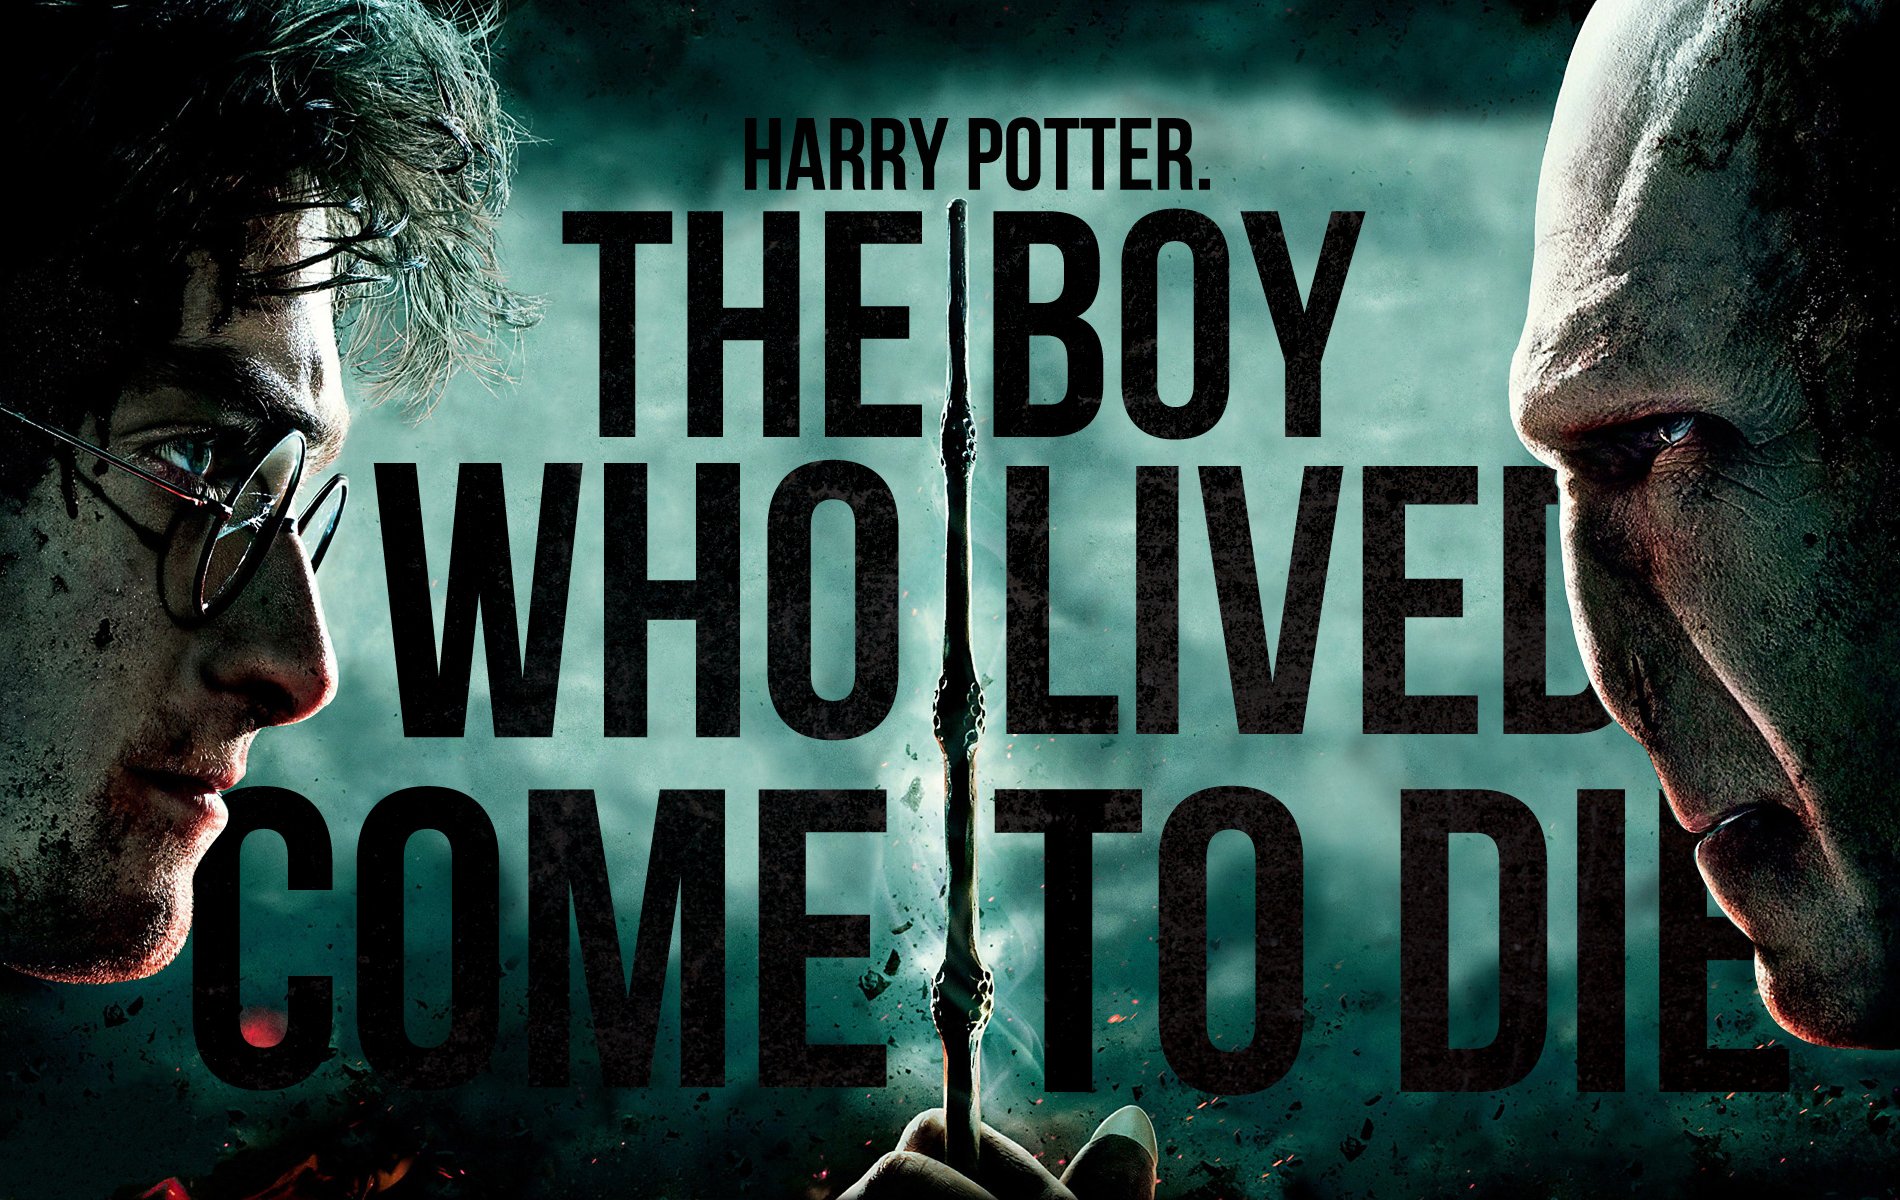 Harry Potter And The Deathly Hallows Part 2 Computer Wallpapers 1900x1200